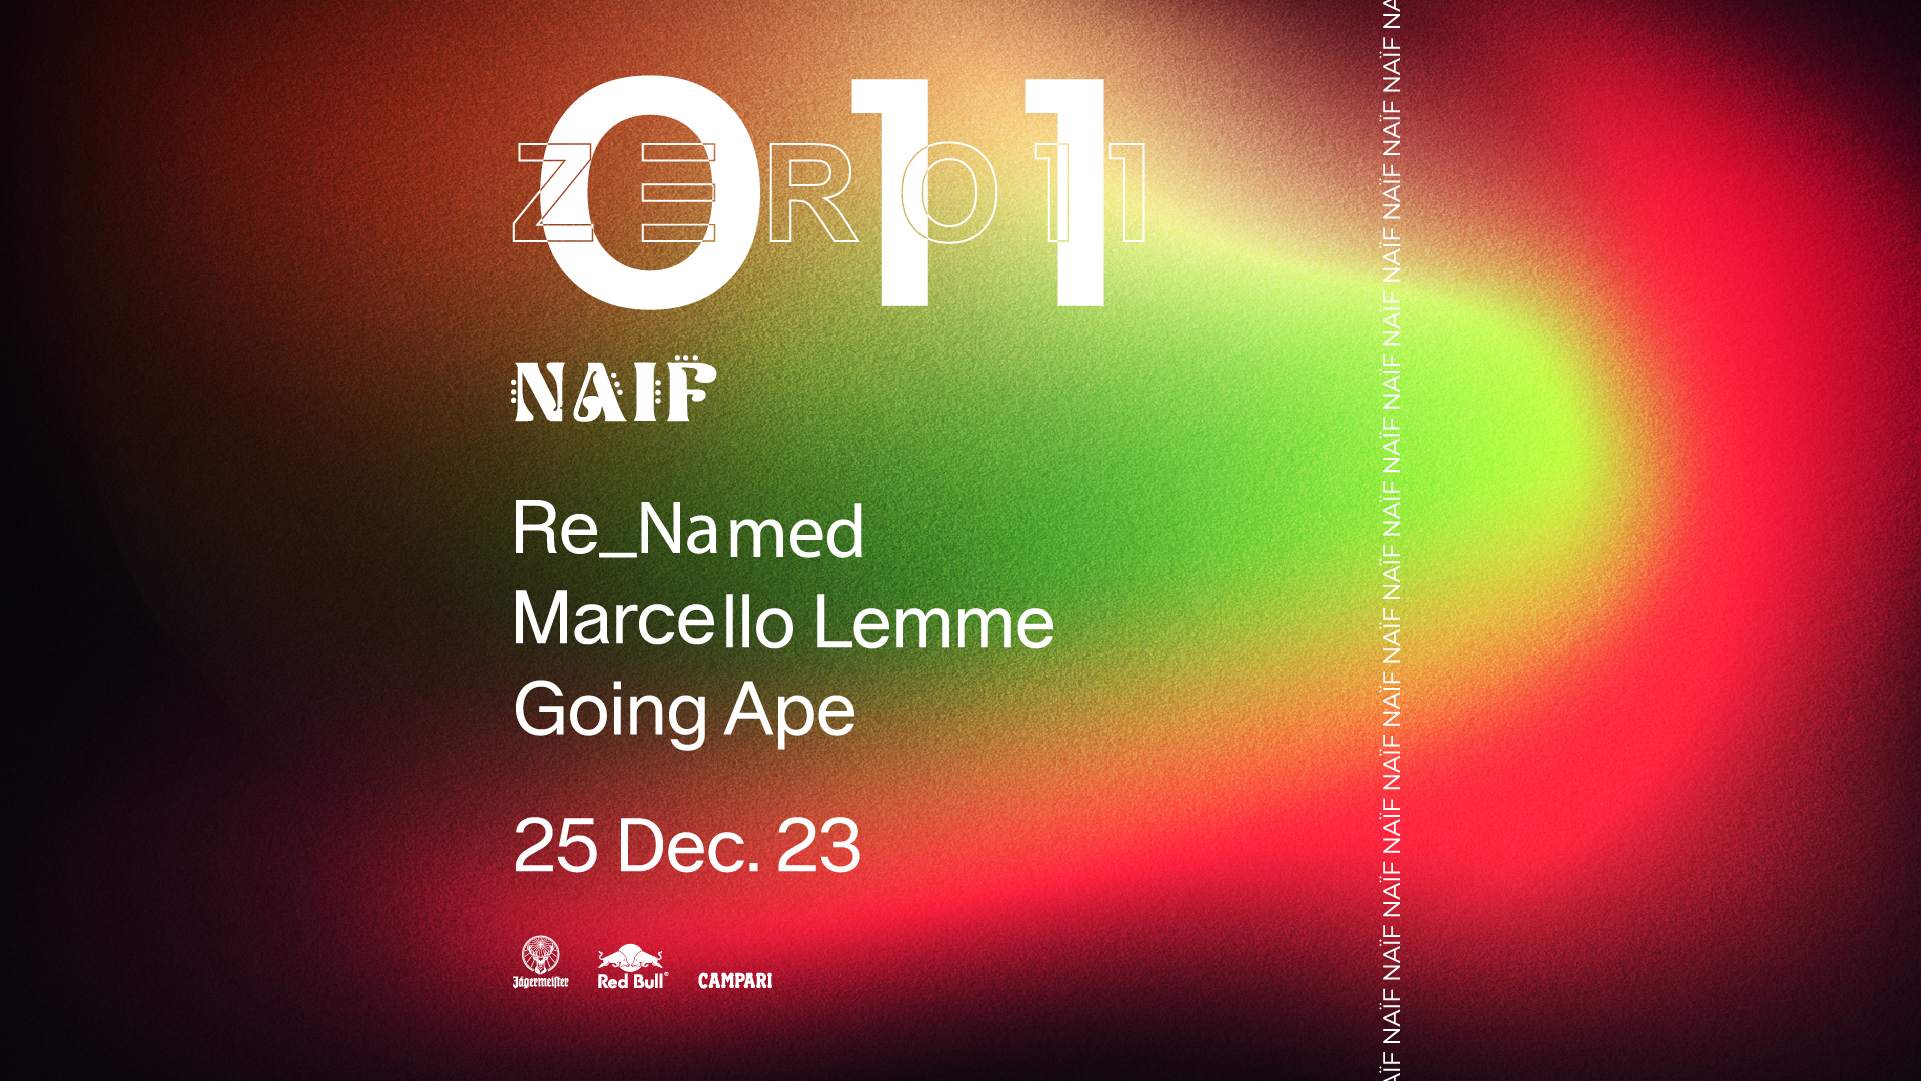 Club Zero11 pres. NAIF with Re_Named, Marcello Lemme, Going Ape - フライヤー表